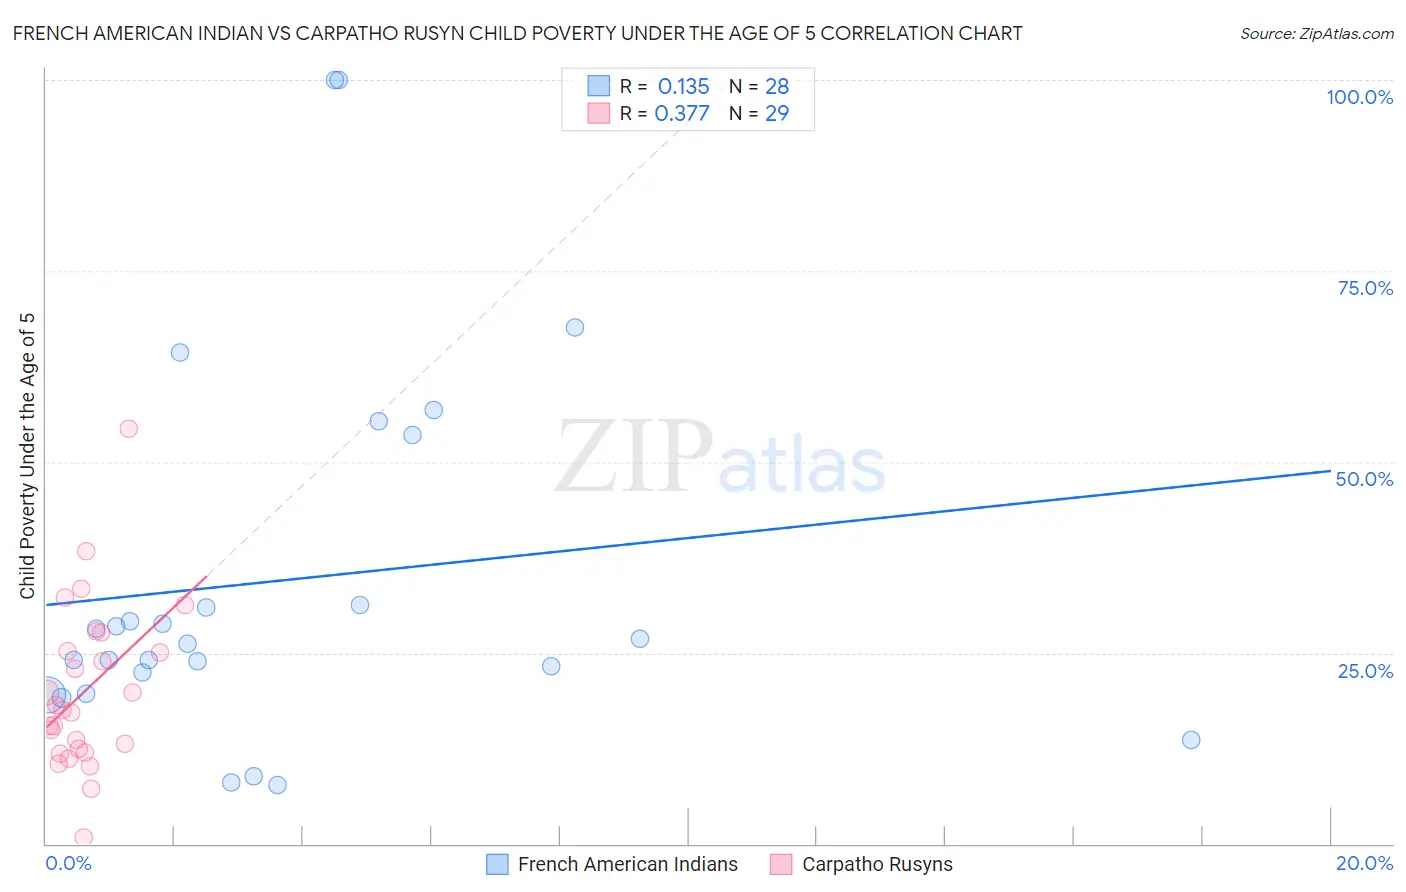 French American Indian vs Carpatho Rusyn Child Poverty Under the Age of 5